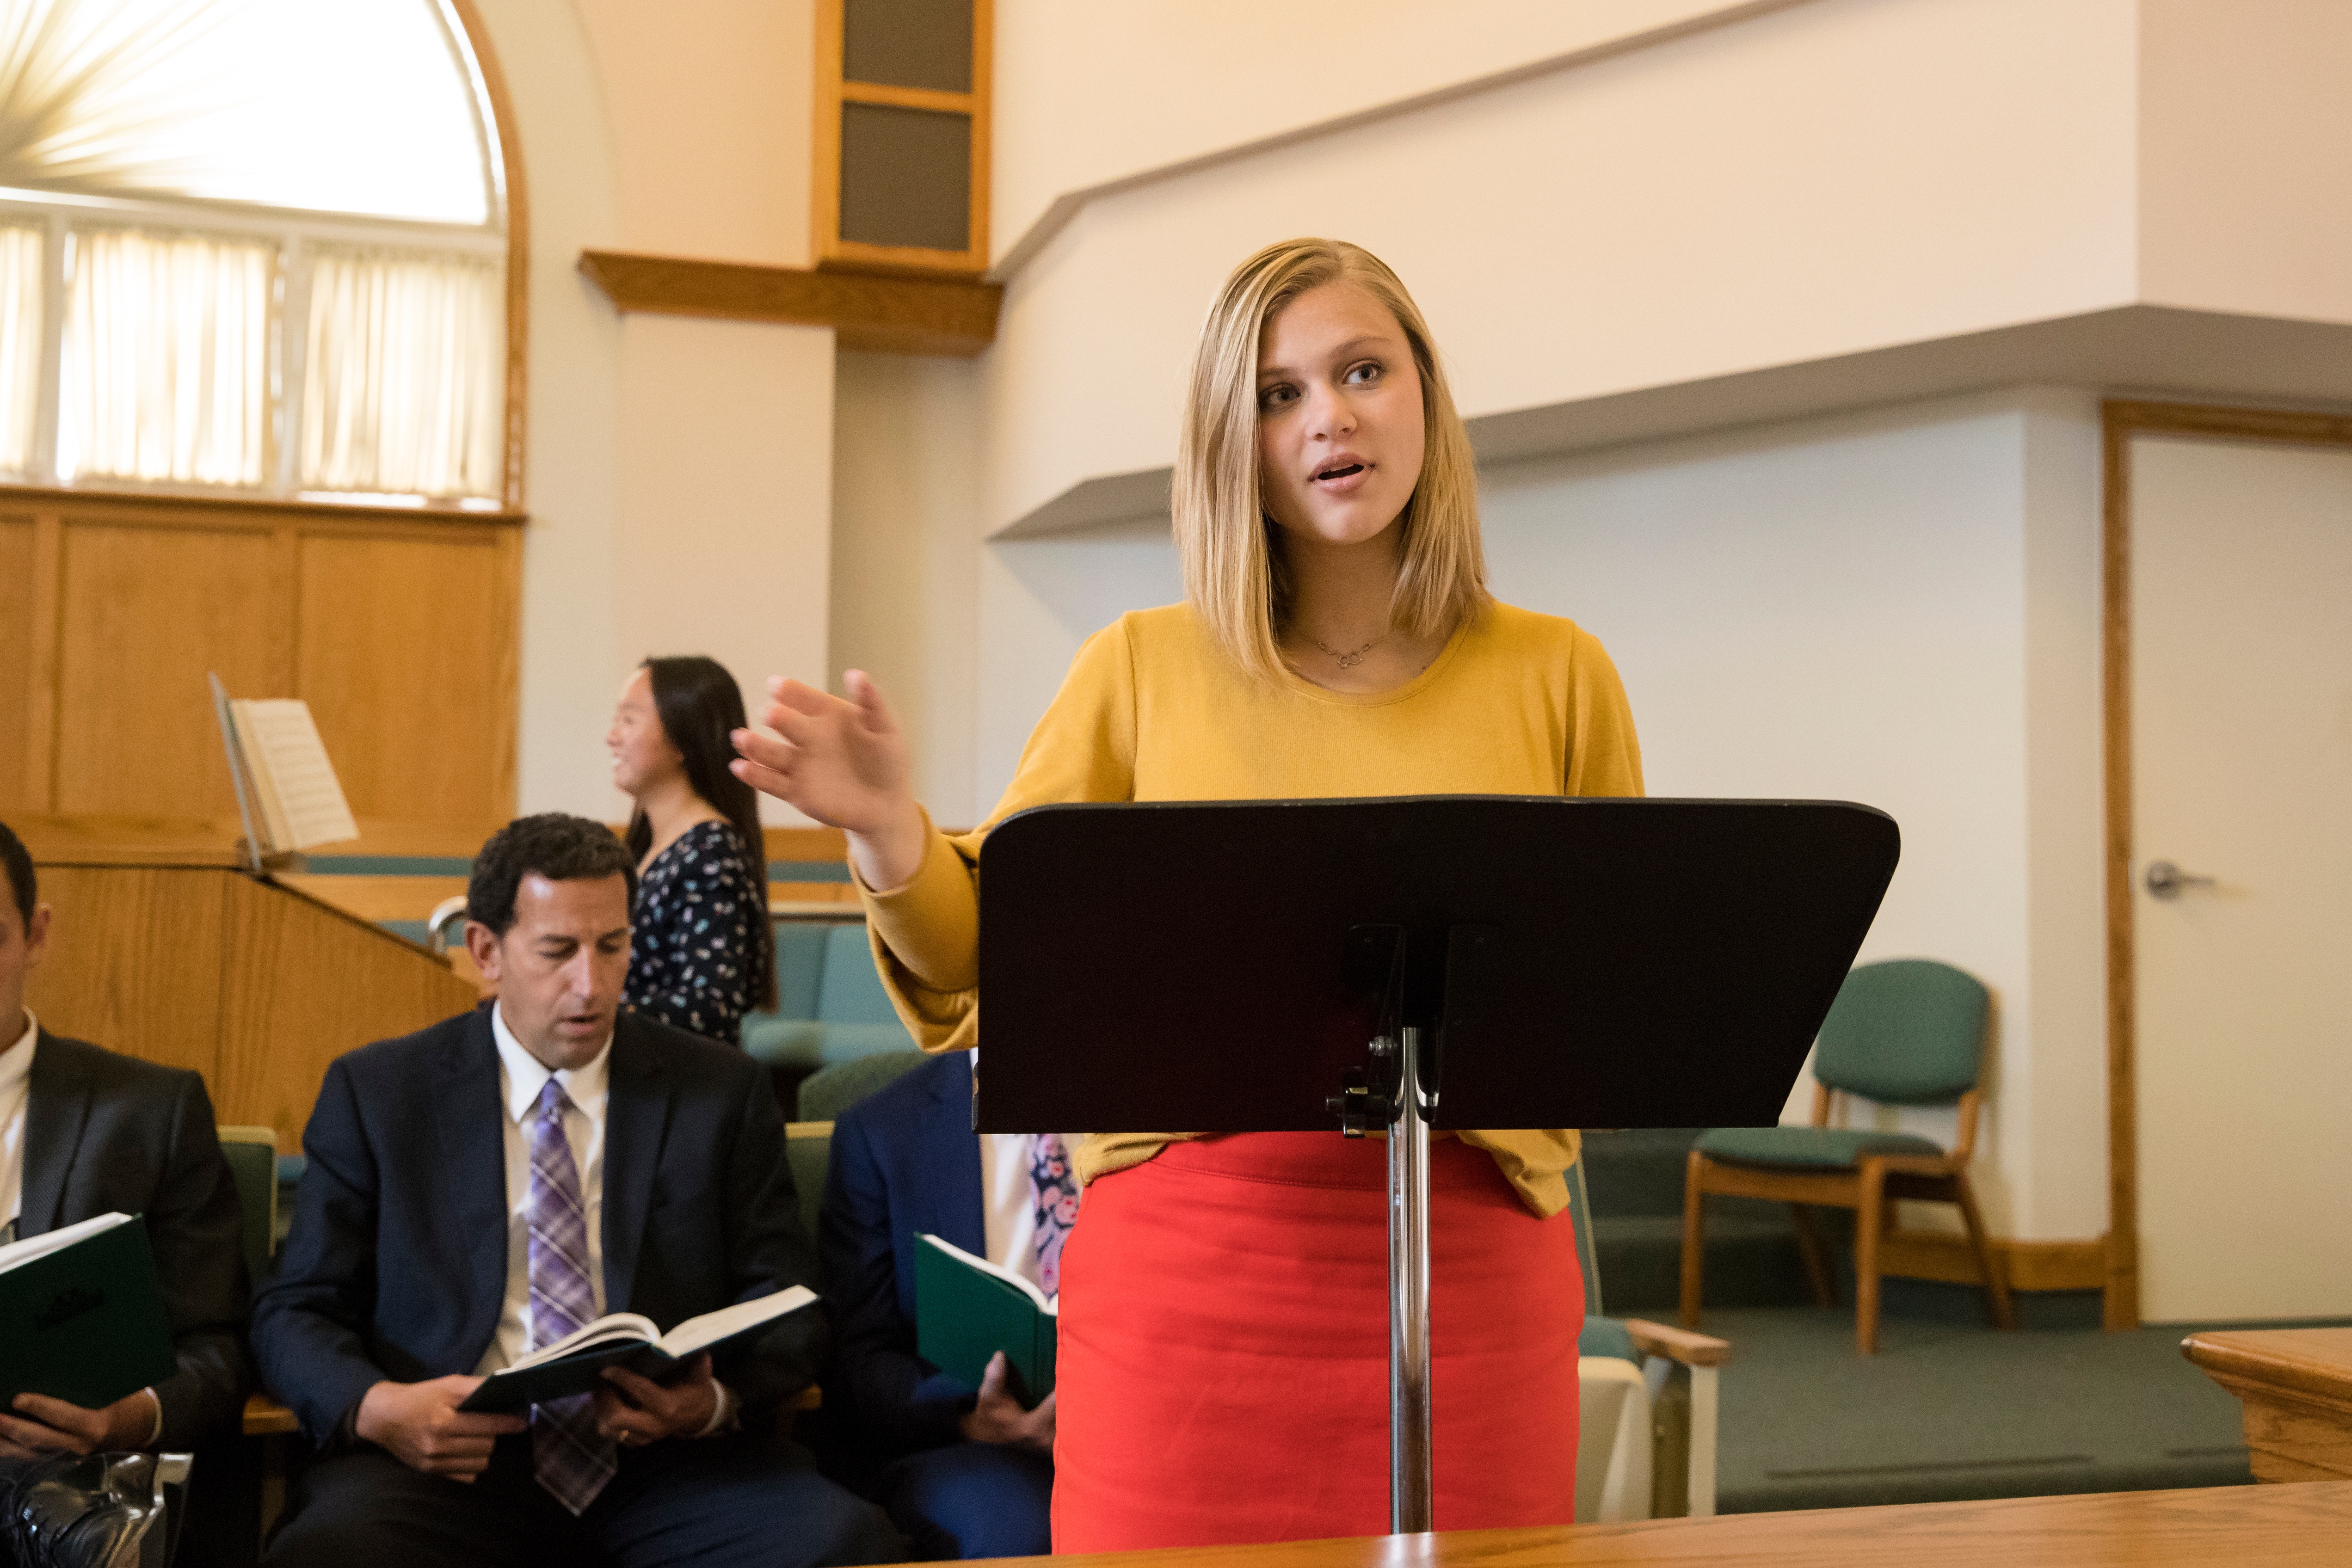 Young Adults Together in Church: Mormon and Gay Website